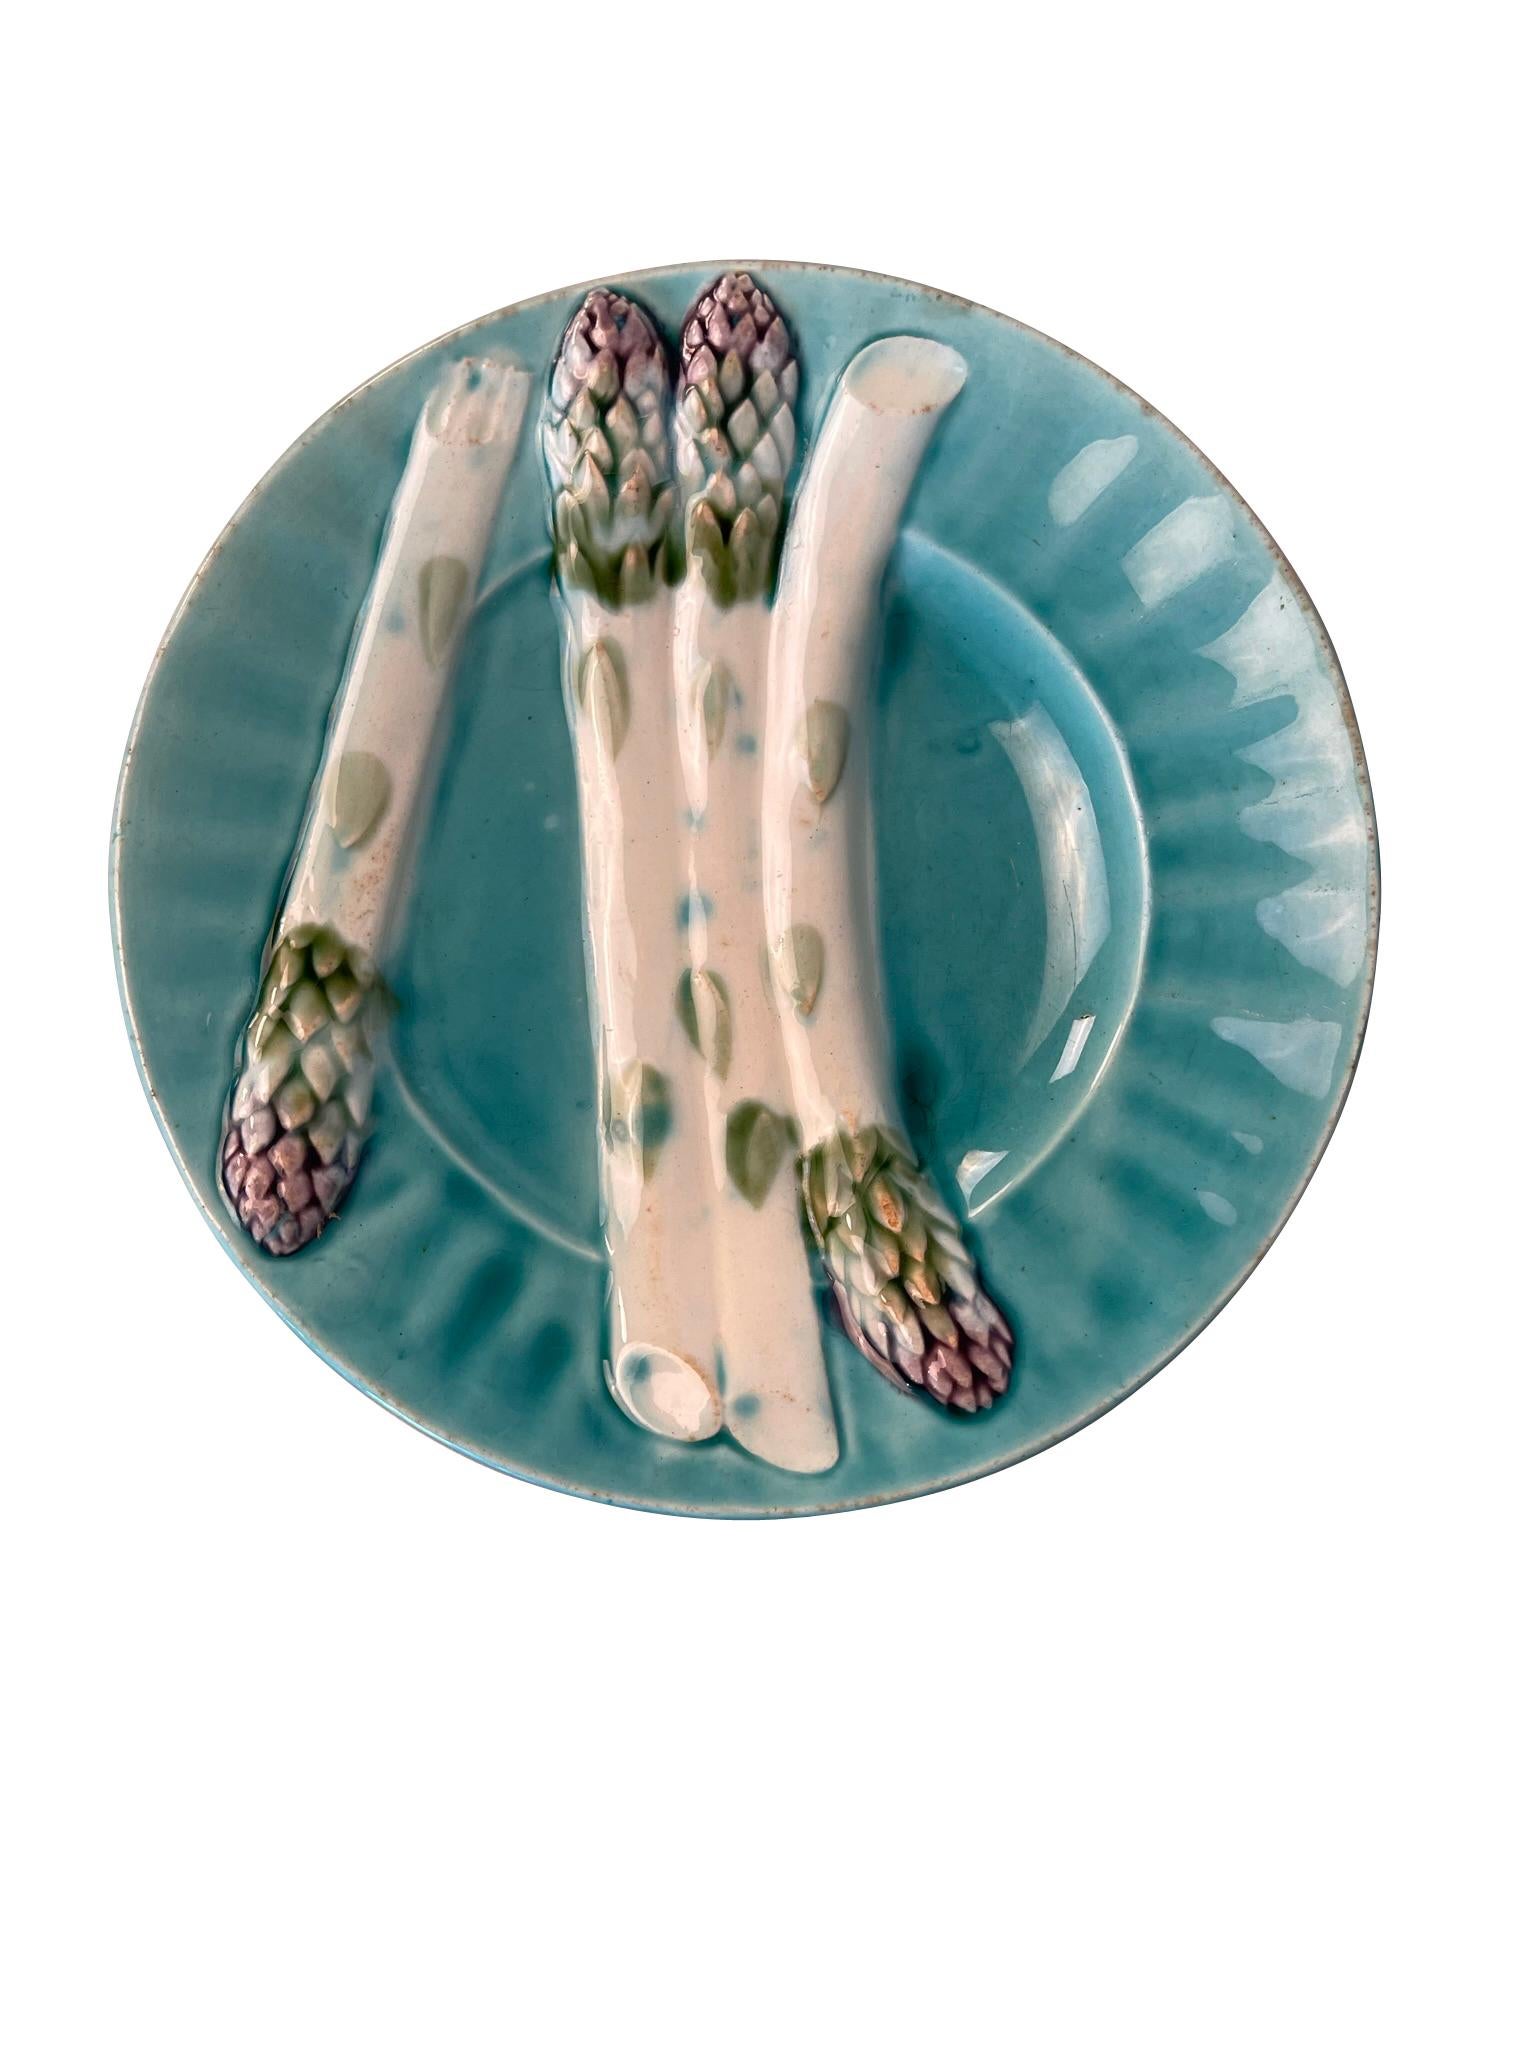 Lot of 7 French Majolica Depose KG Luneville asparagus plates from the Keller and Guerin Frers era. They are decorated in turquoise blue with white and green asparagus images. Decorative enough to hang on a wall or lovely in a dresser.

Lunéville